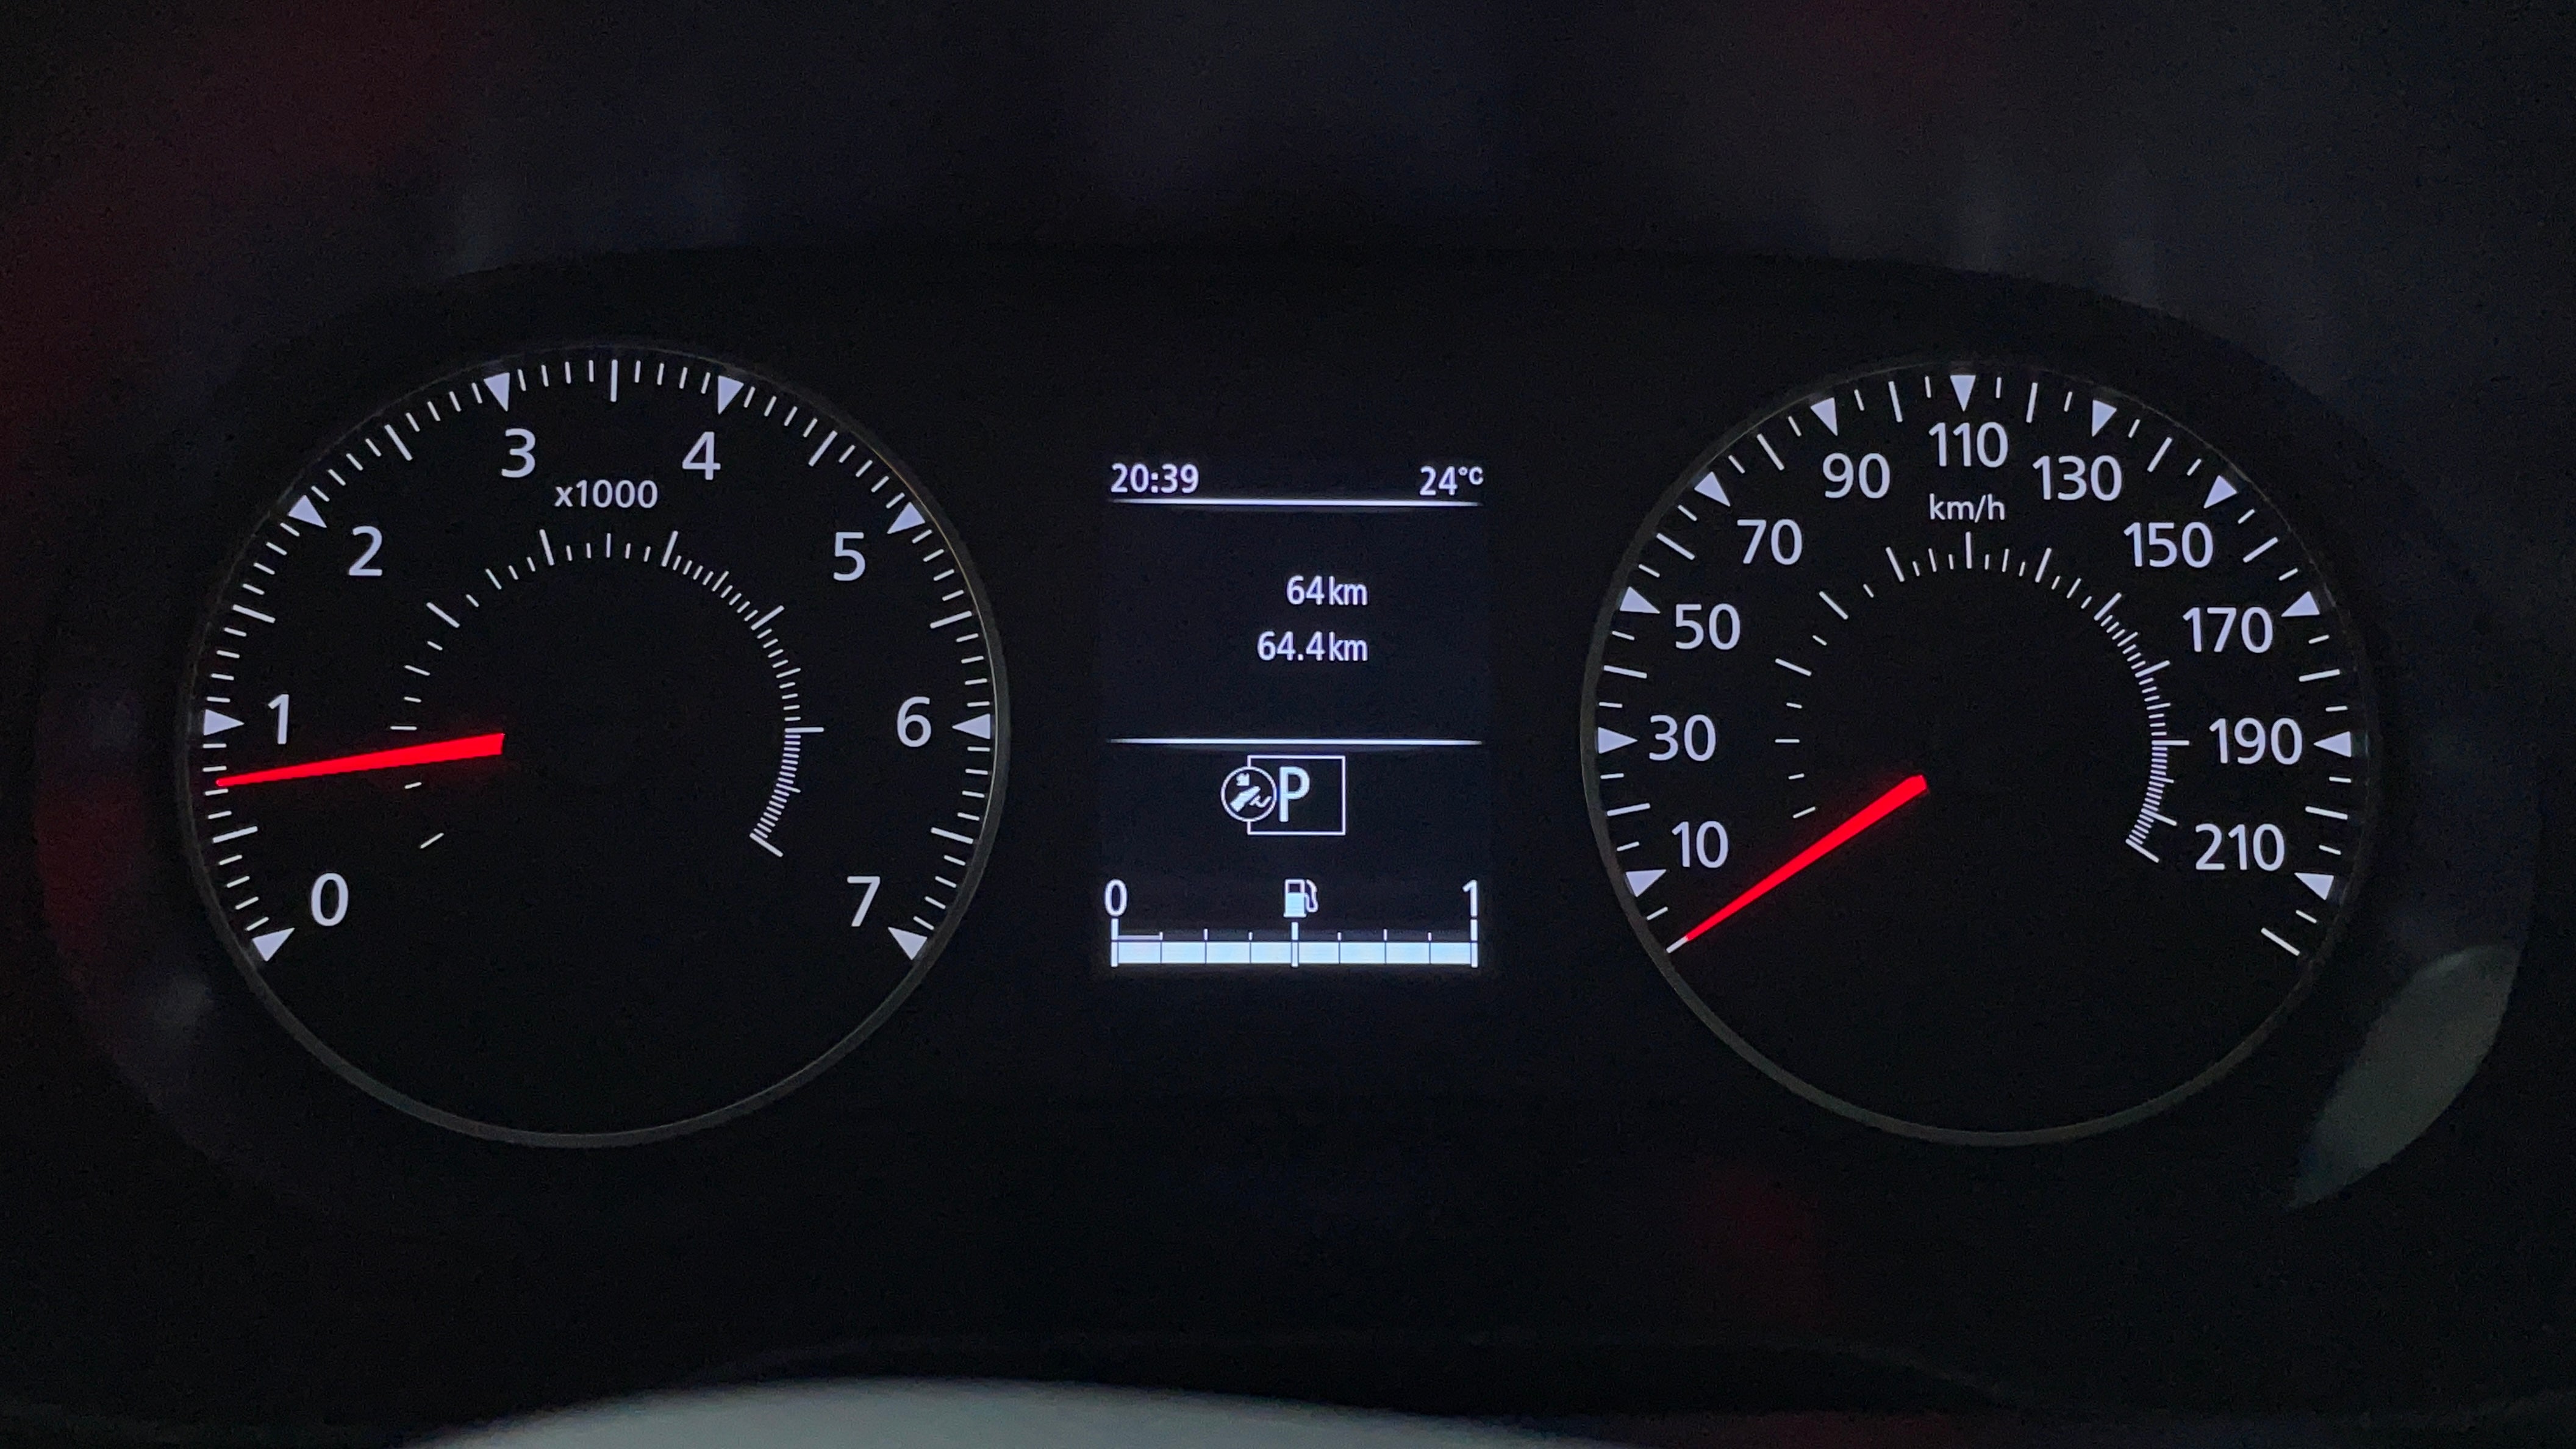 Renault Duster-Odometer View